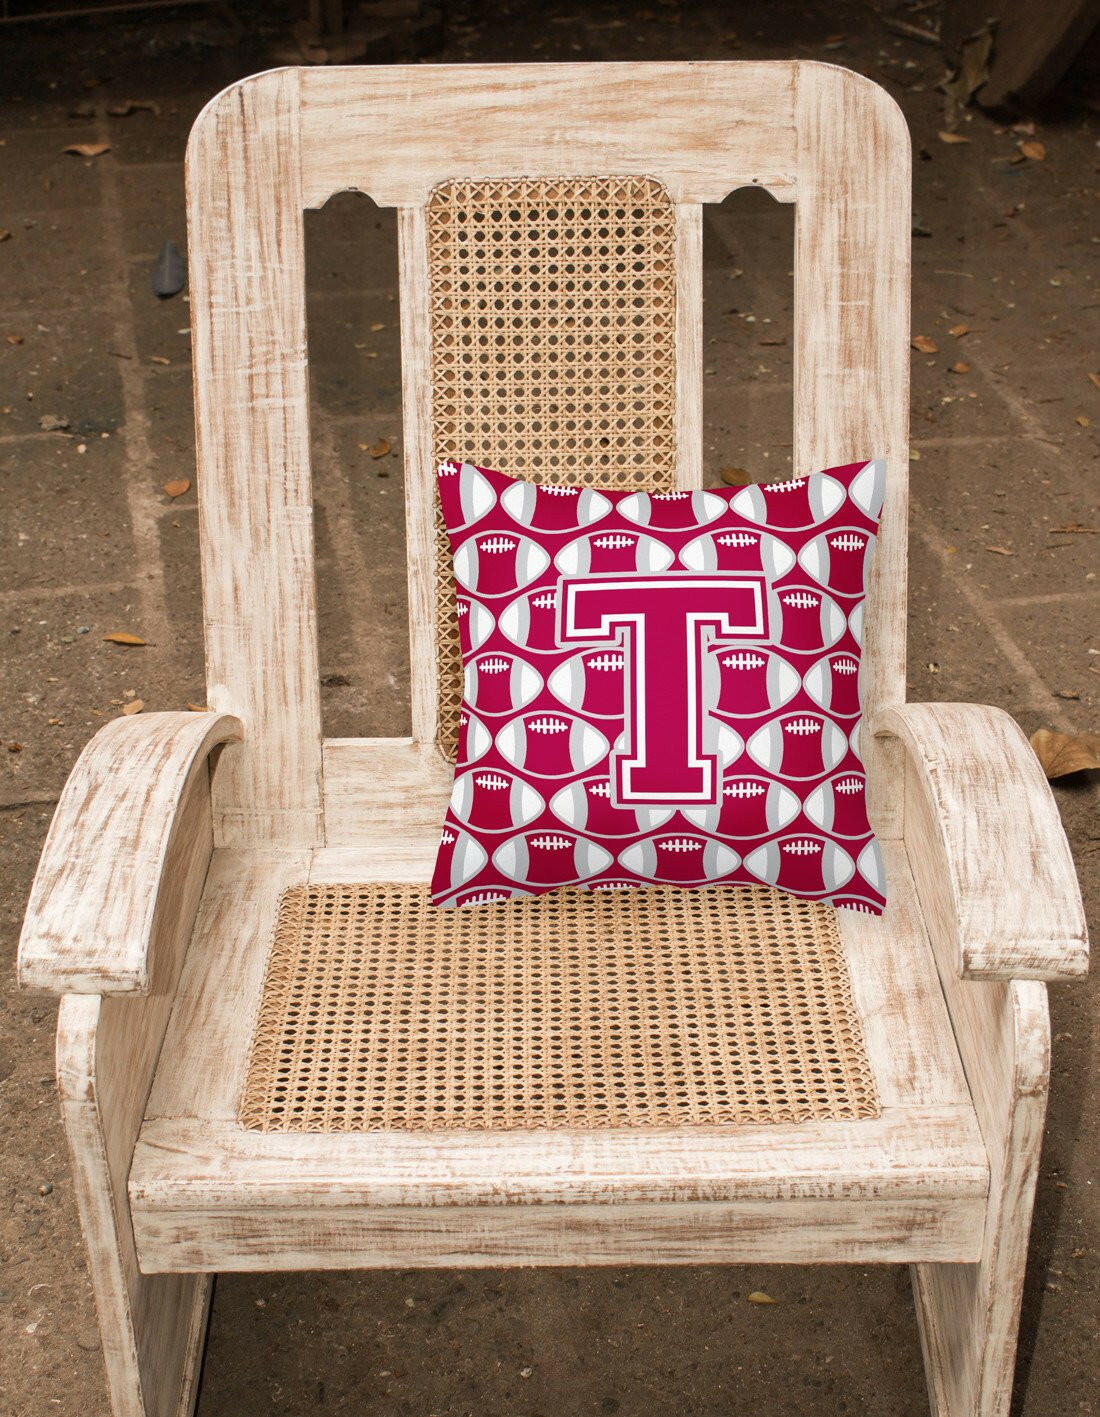 Letter T Football Crimson, grey and white Fabric Decorative Pillow CJ1065-TPW1414 by Caroline's Treasures